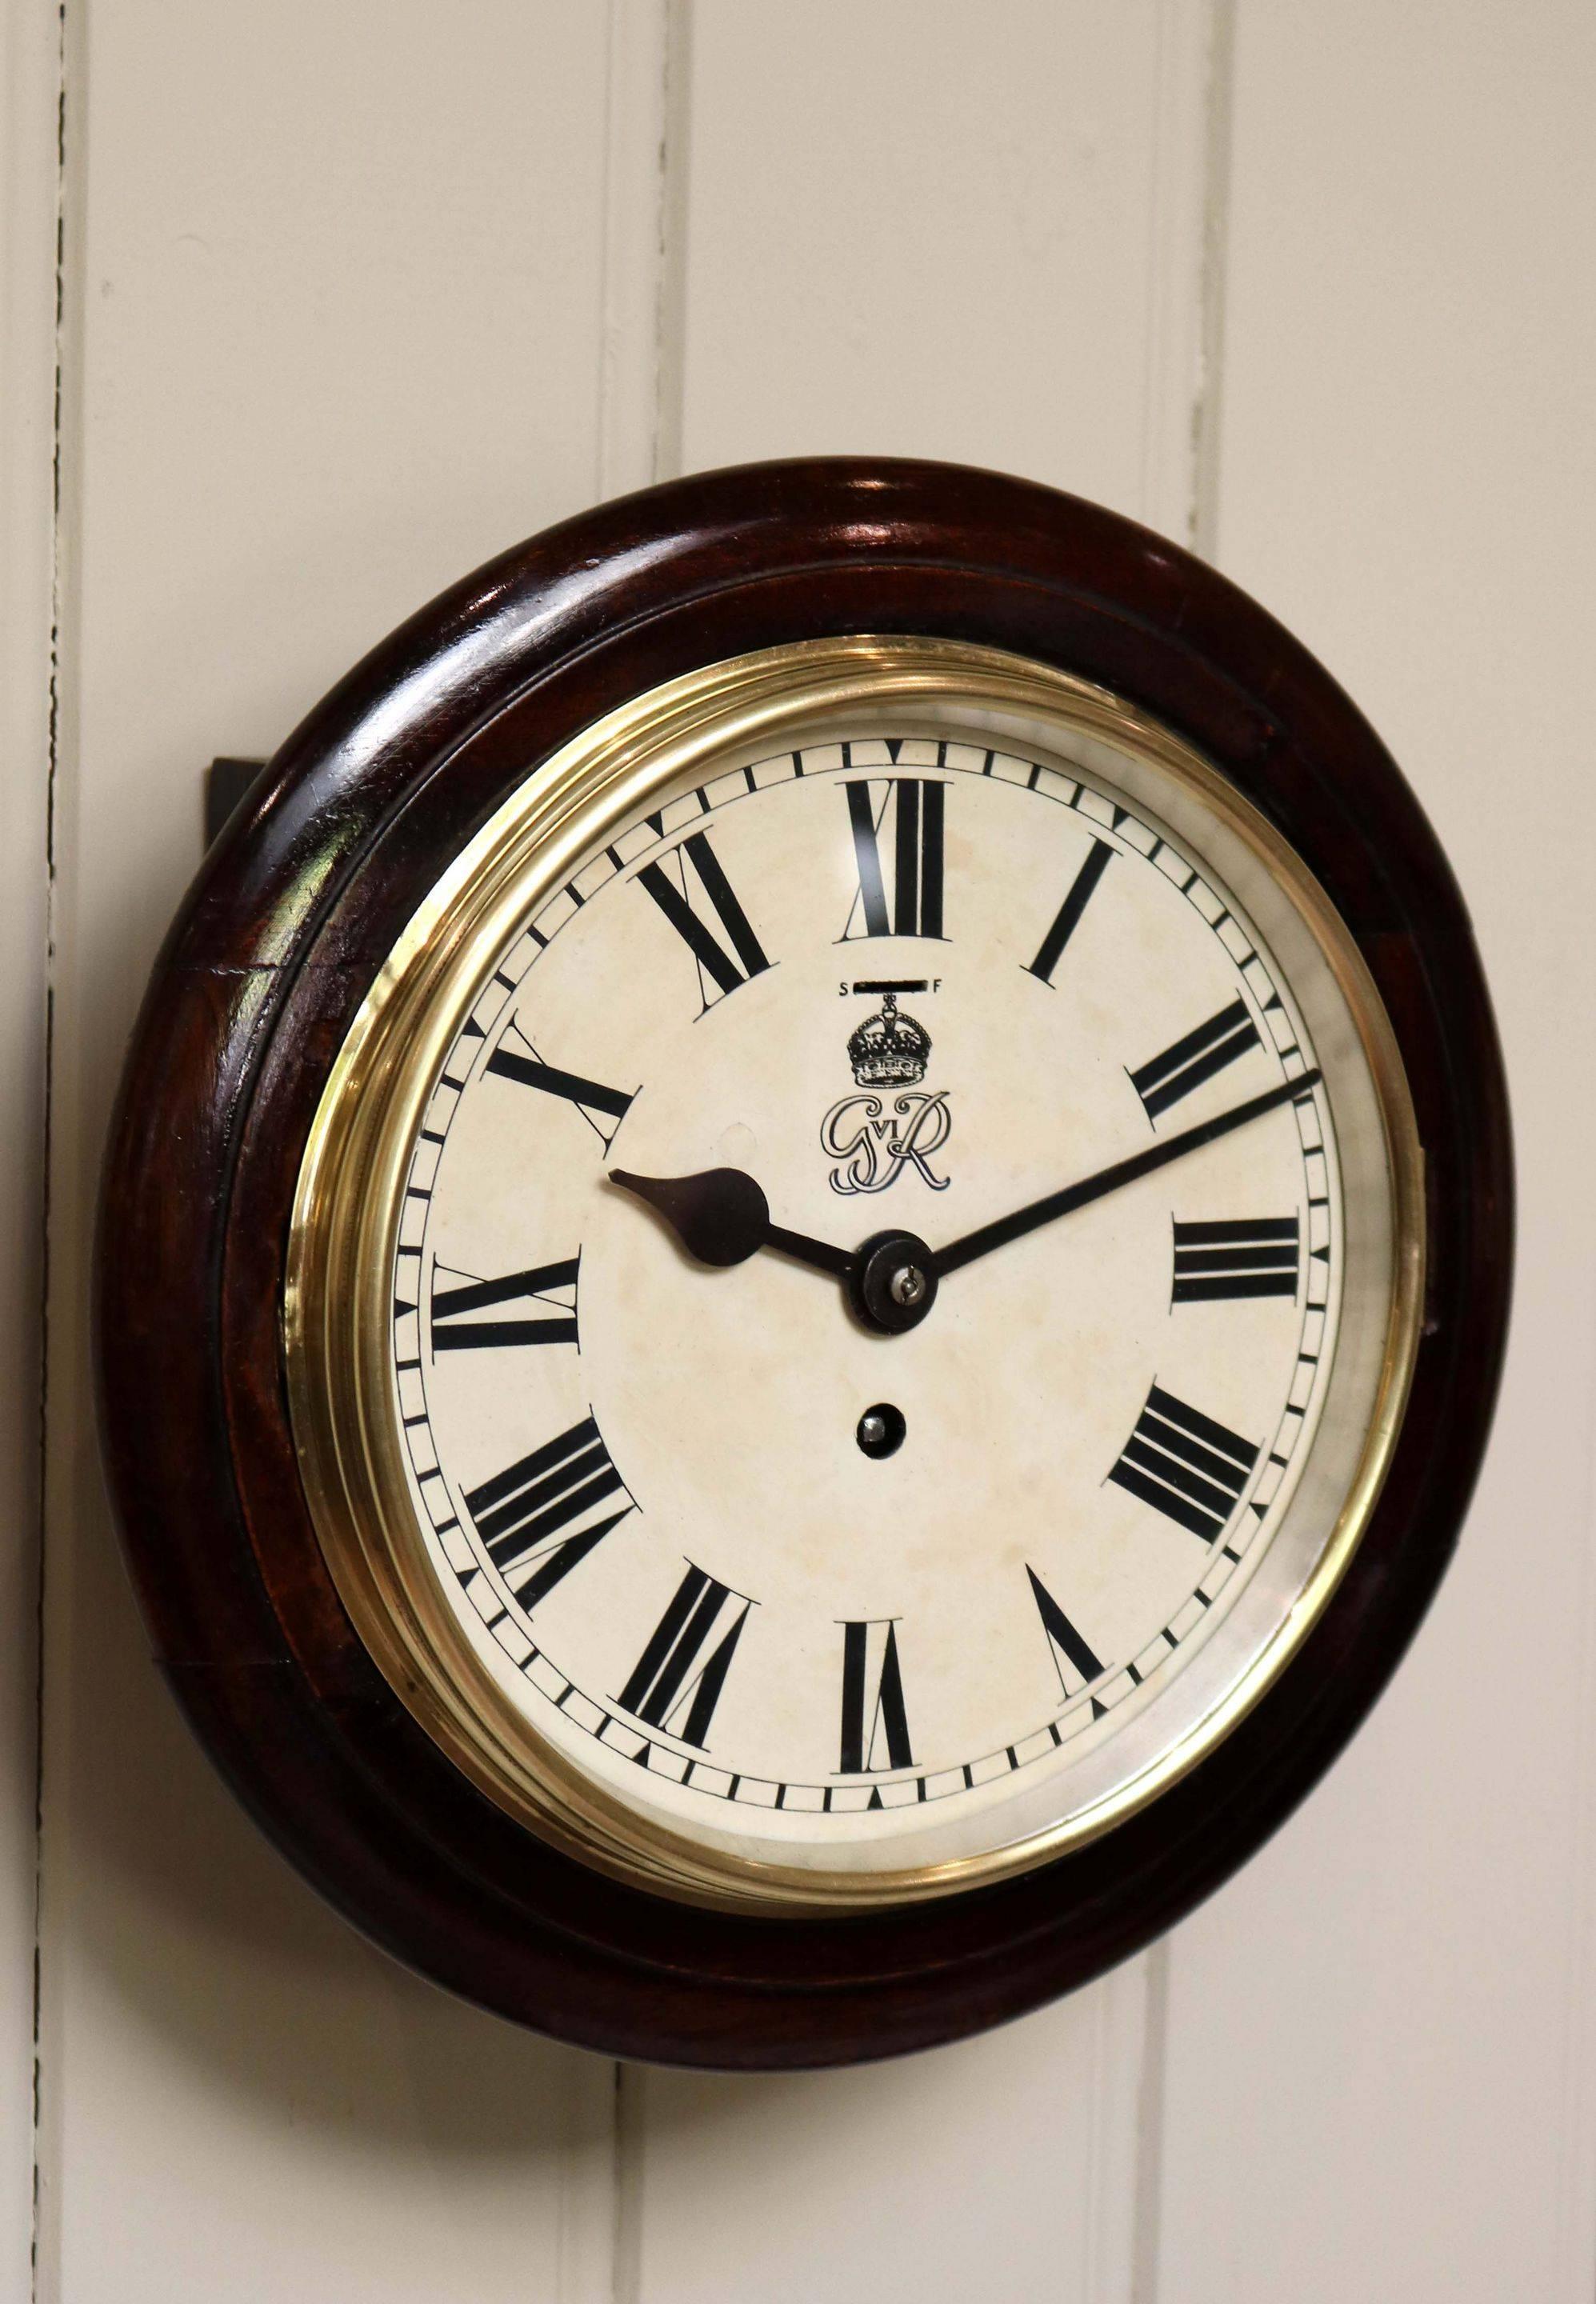 An original solid mahogany cased Post Office/Government Building dial clock, having a turned mahogany rim, with a brass bezel. The white enamel dial has the crest for George VI. The 8 day movement has an 8 day lever platform movement.